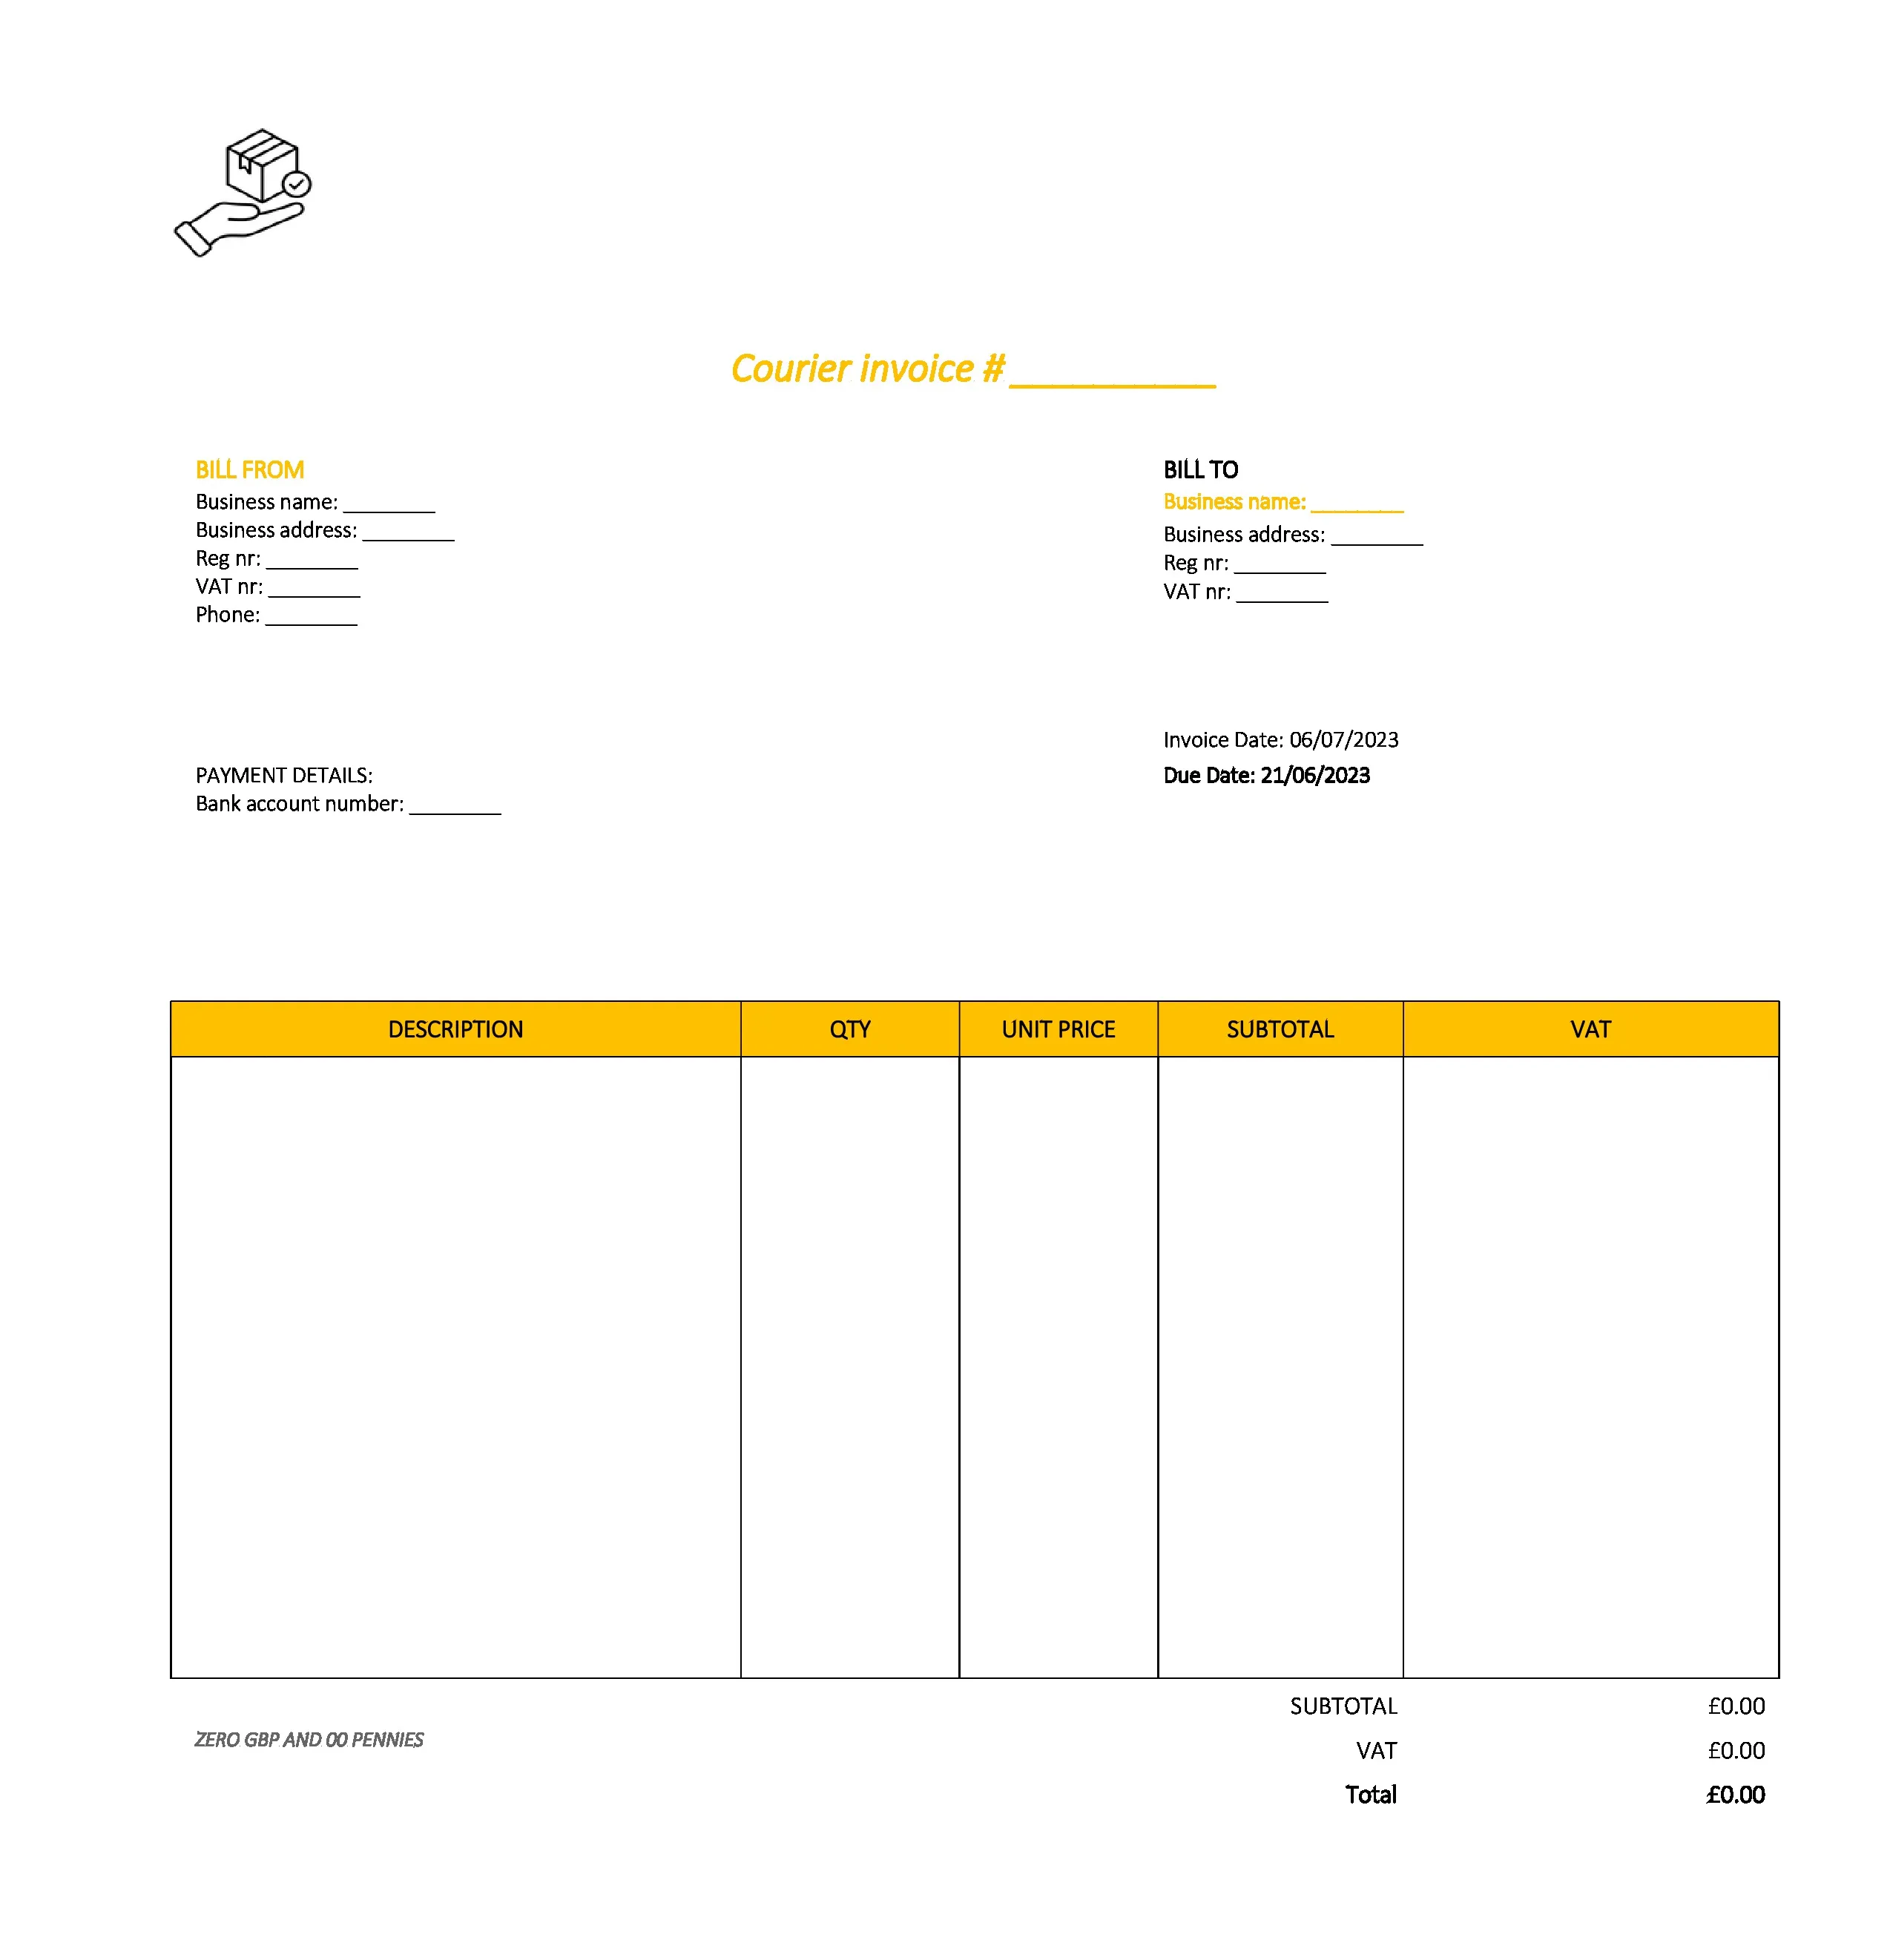 draft courier invoice template UK Excel / Google sheets